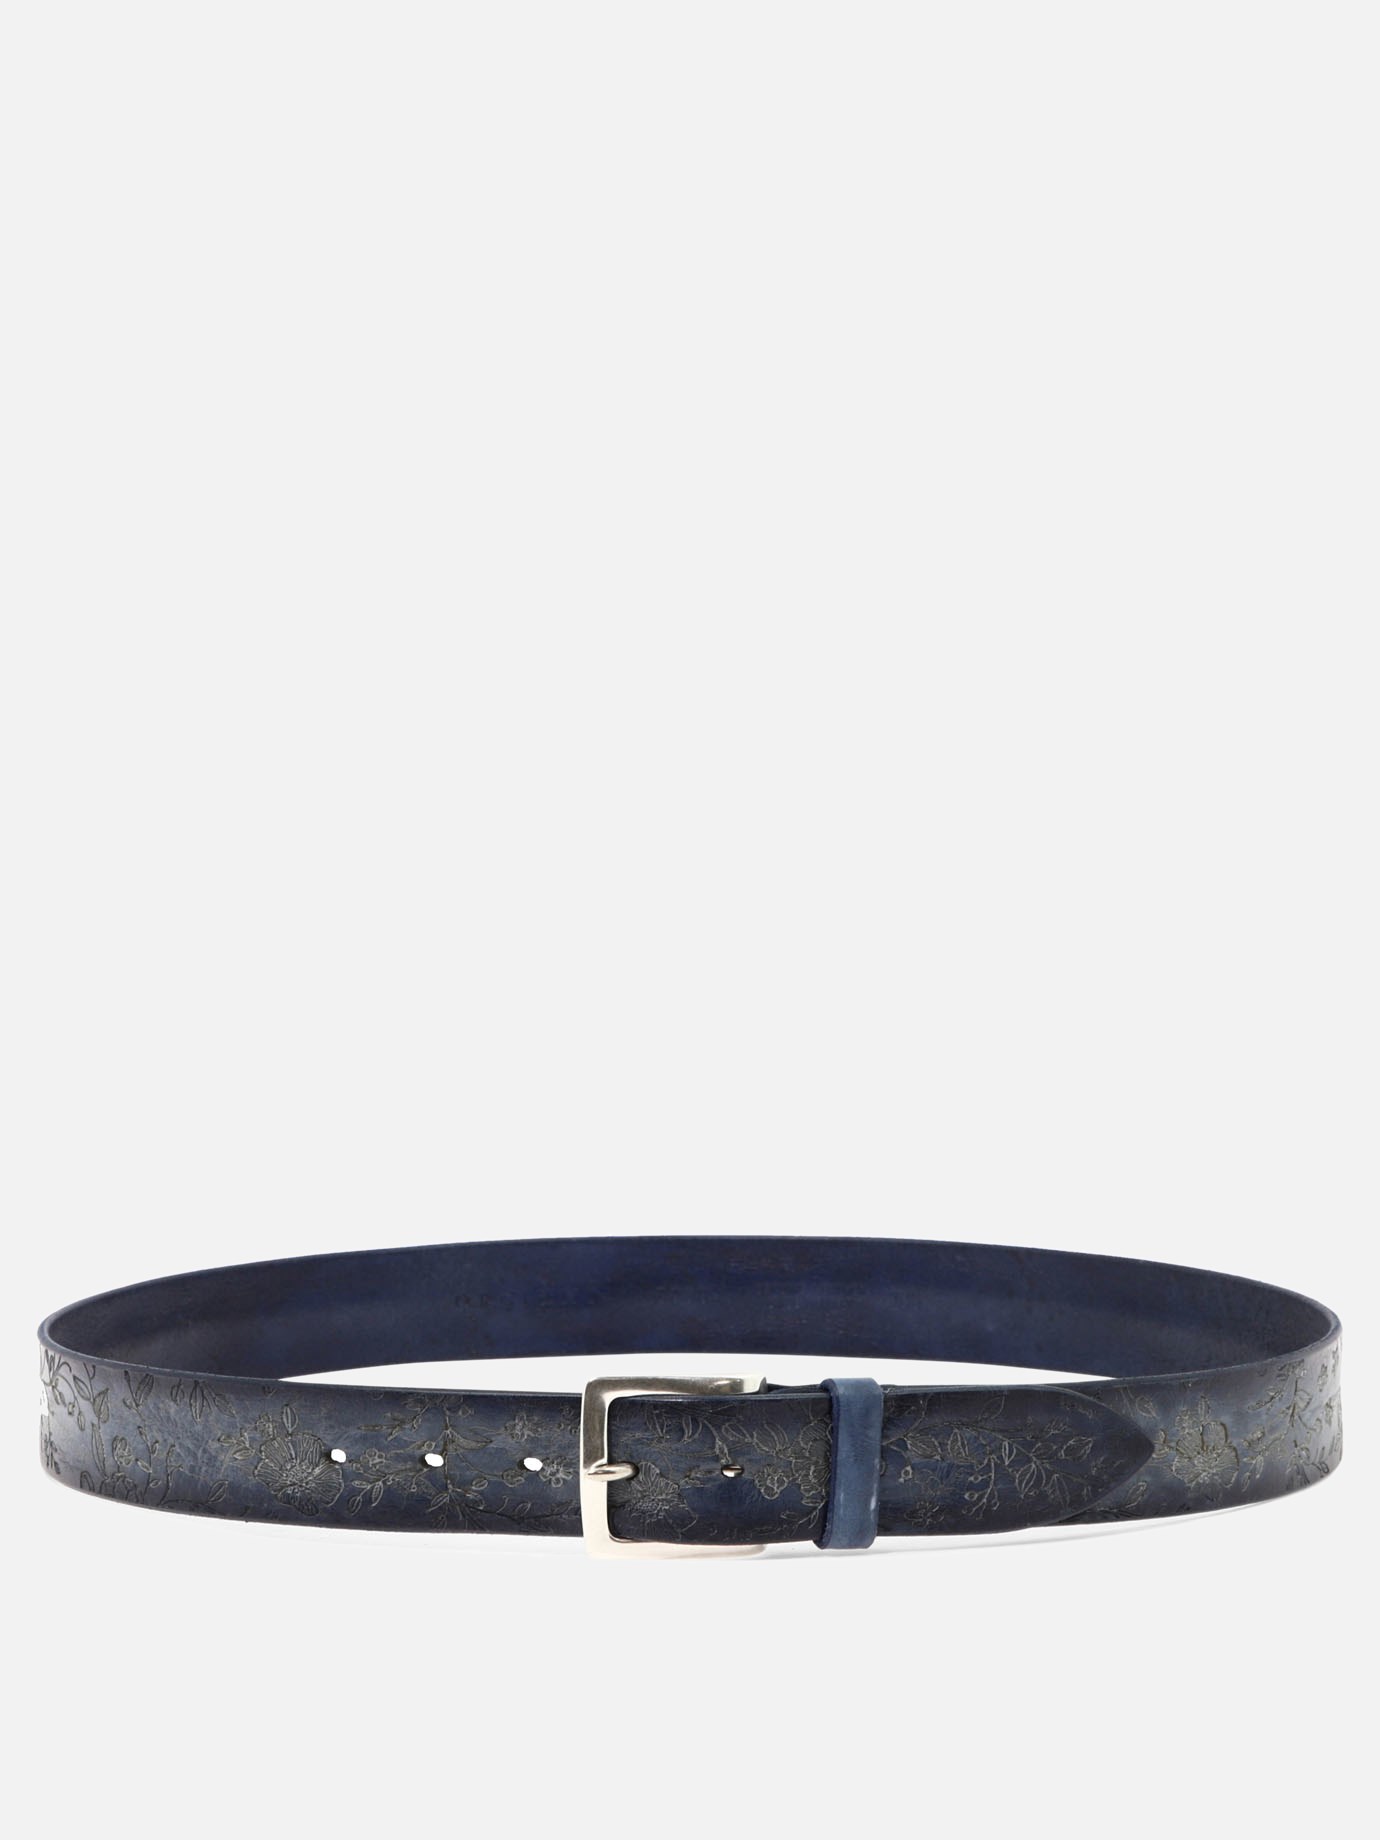  Stain Soapy  beltby Orciani - 5